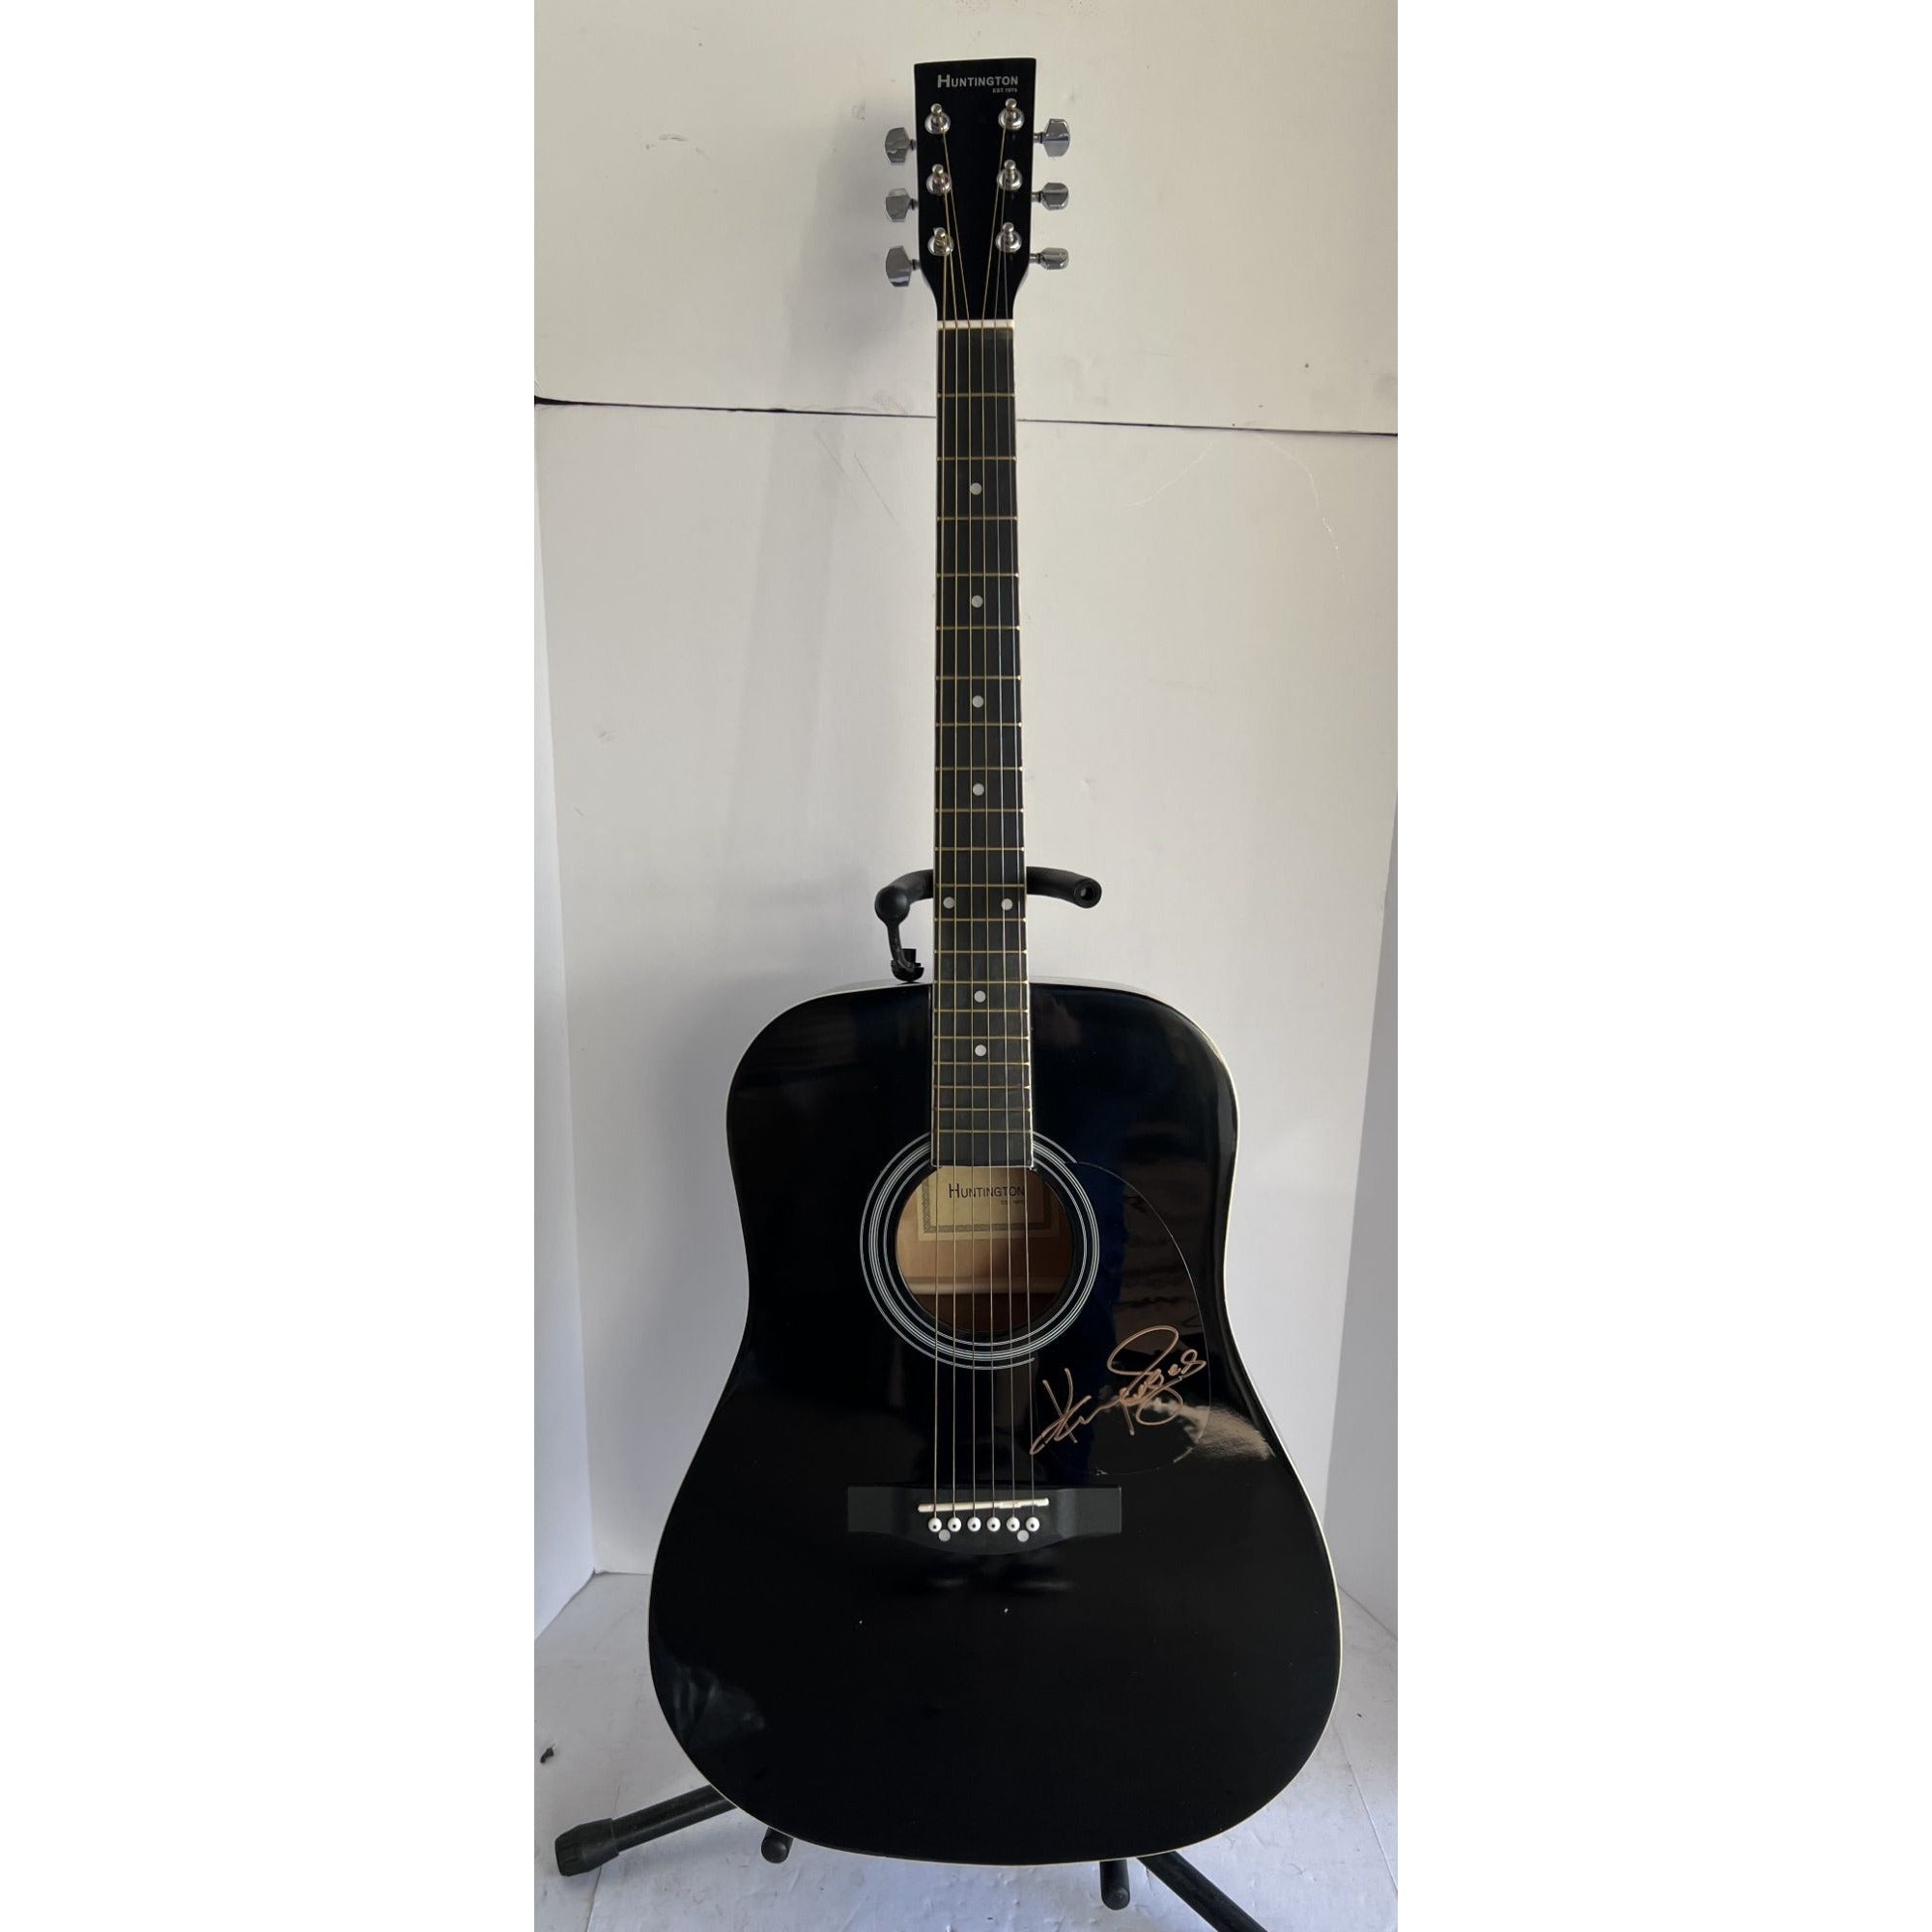 Kenny Rogers One of a Kind acoustic guitar signed with proof